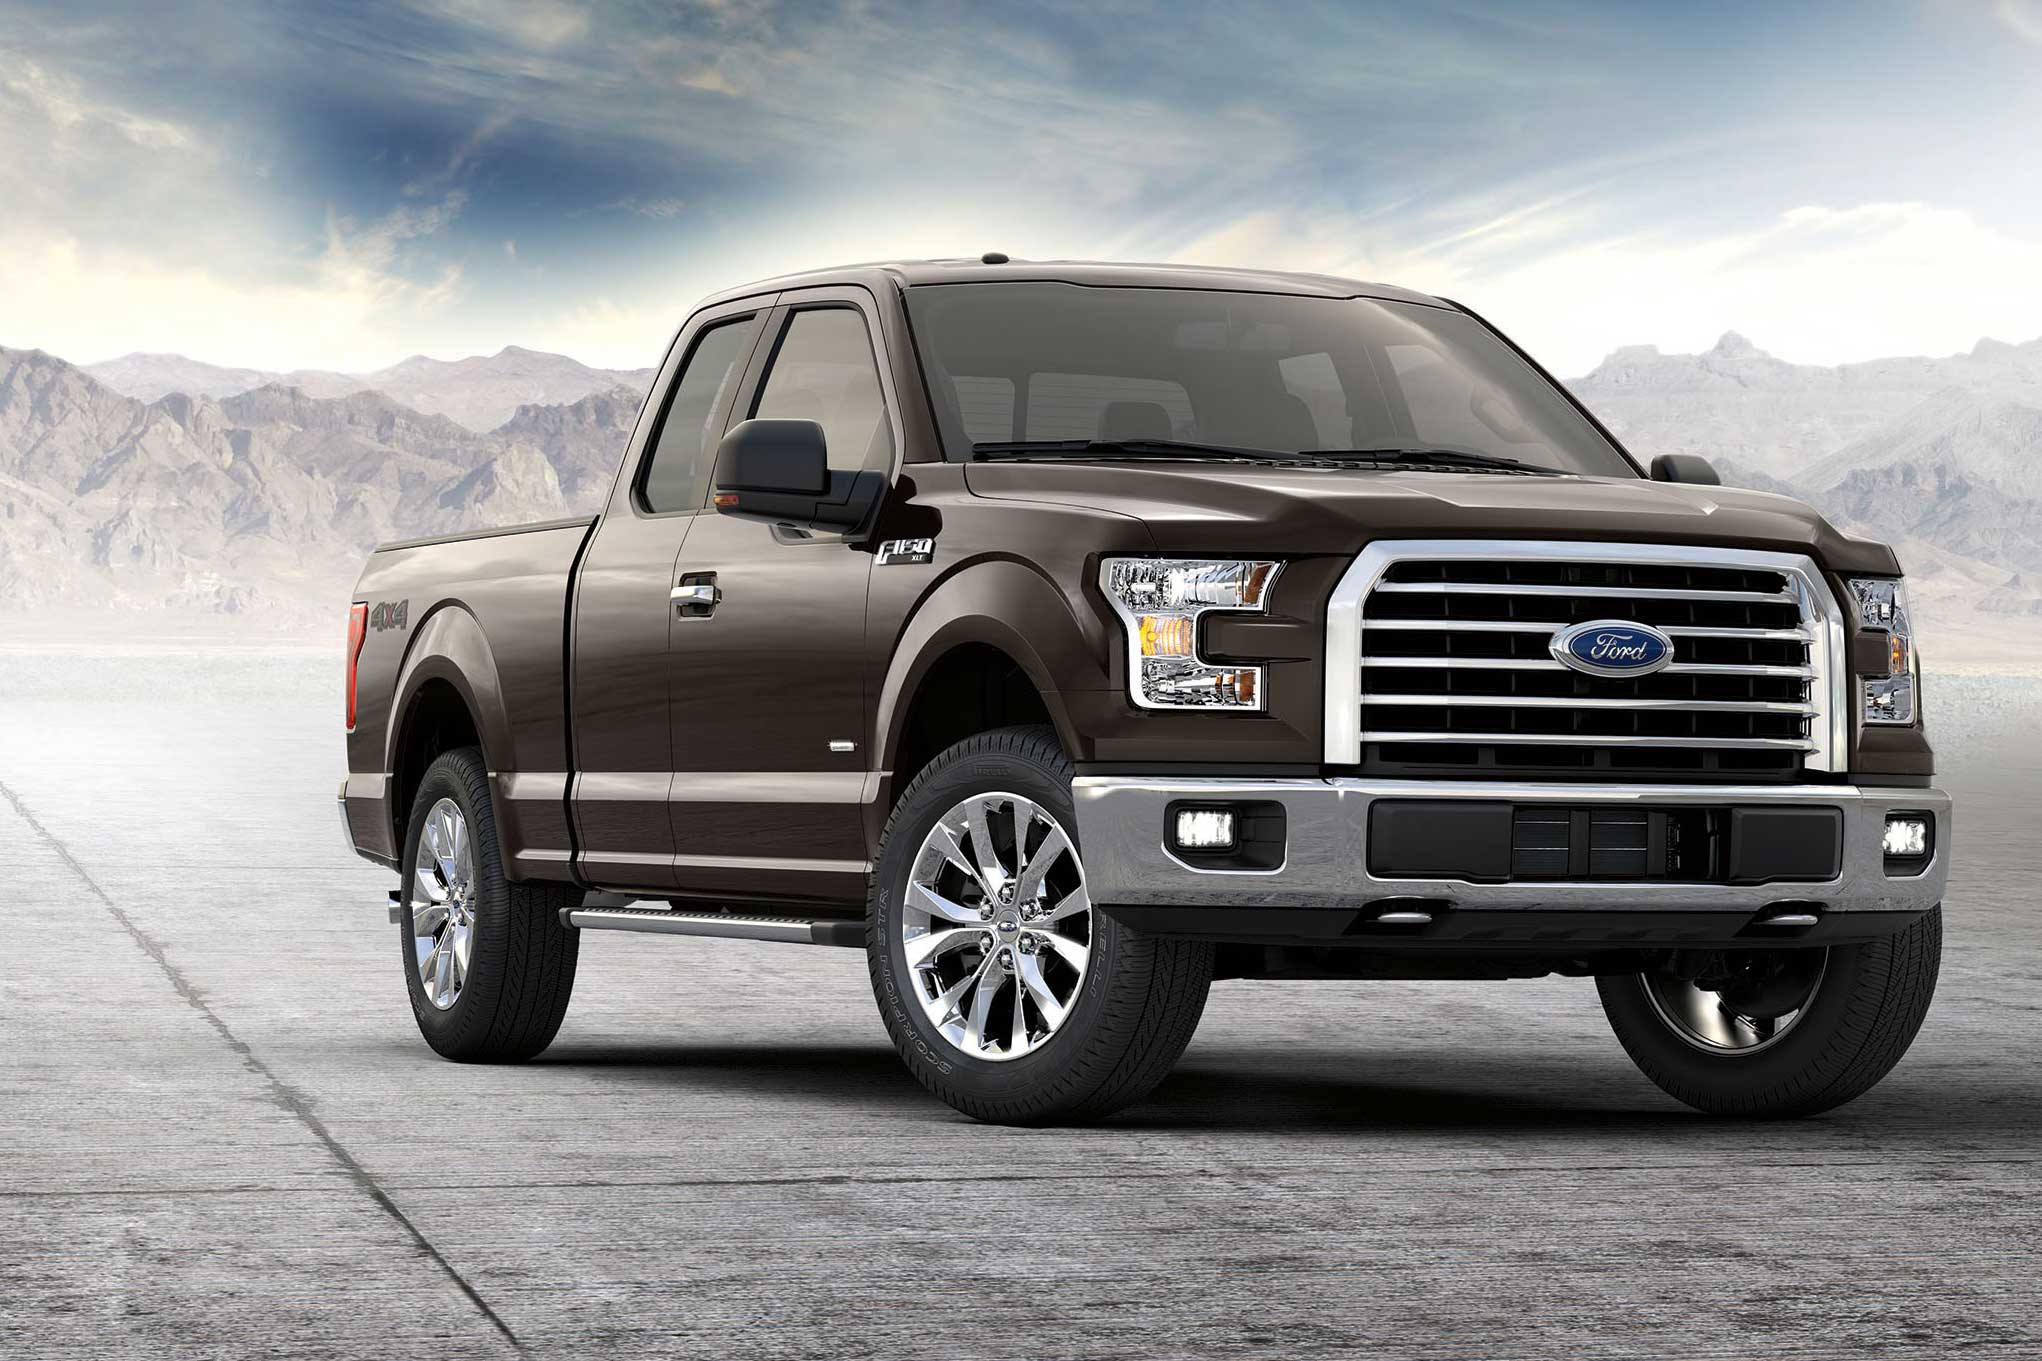 Ford F150 Wallpapers Vehicles Hq Ford F150 Pictures 4k Wallpapers 2019